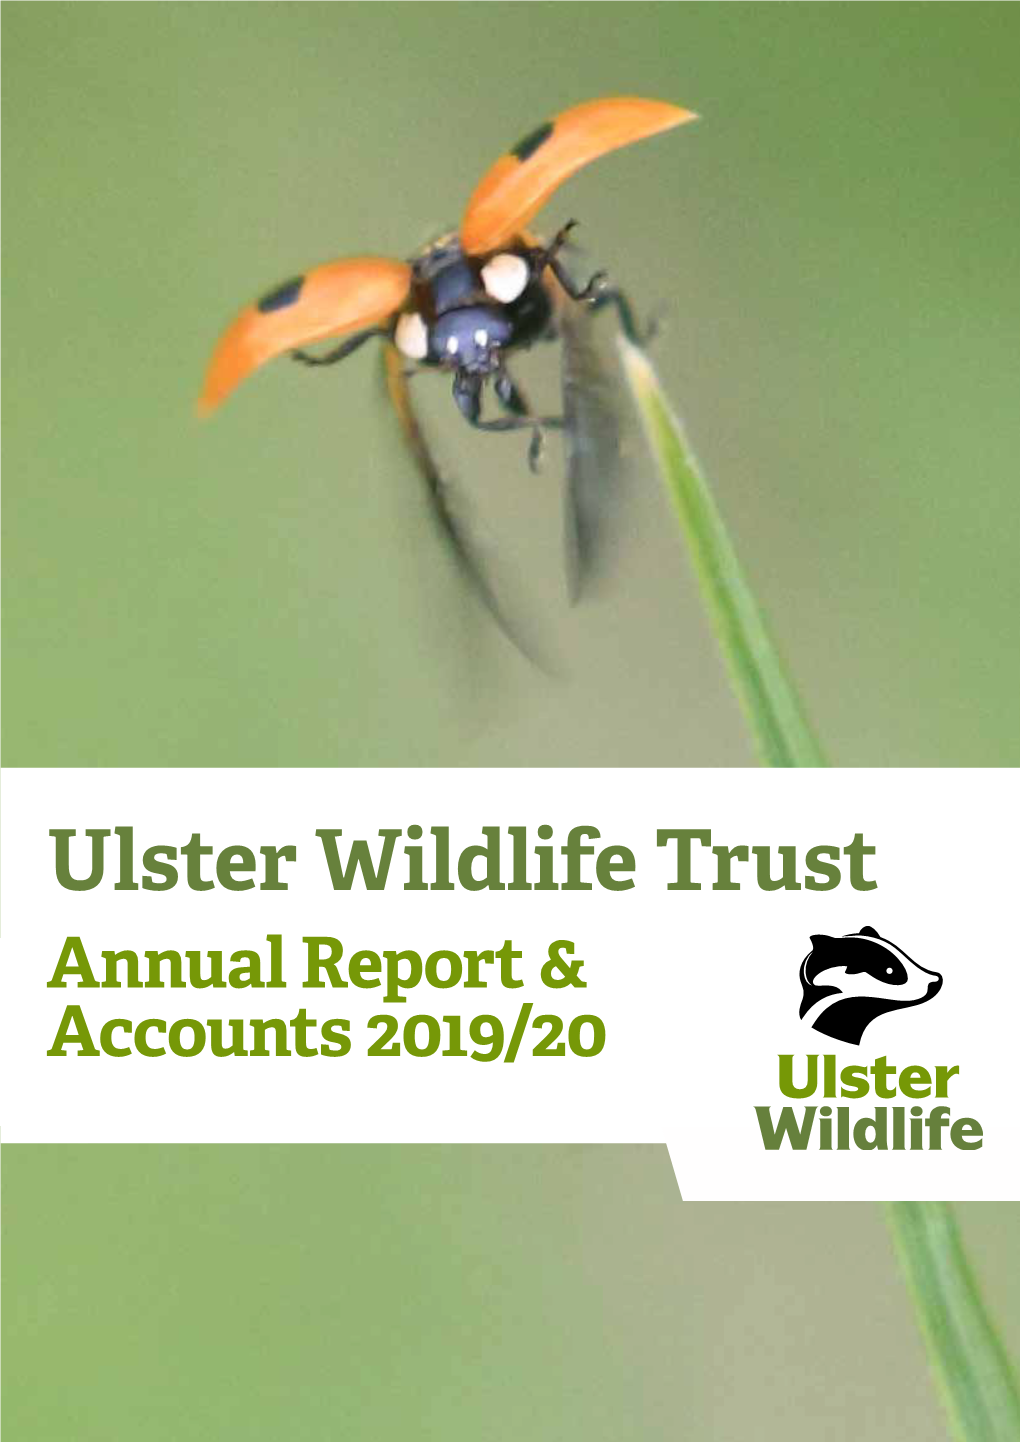 Ulster Wildlife Trust Annual Report & Accounts 2019/20